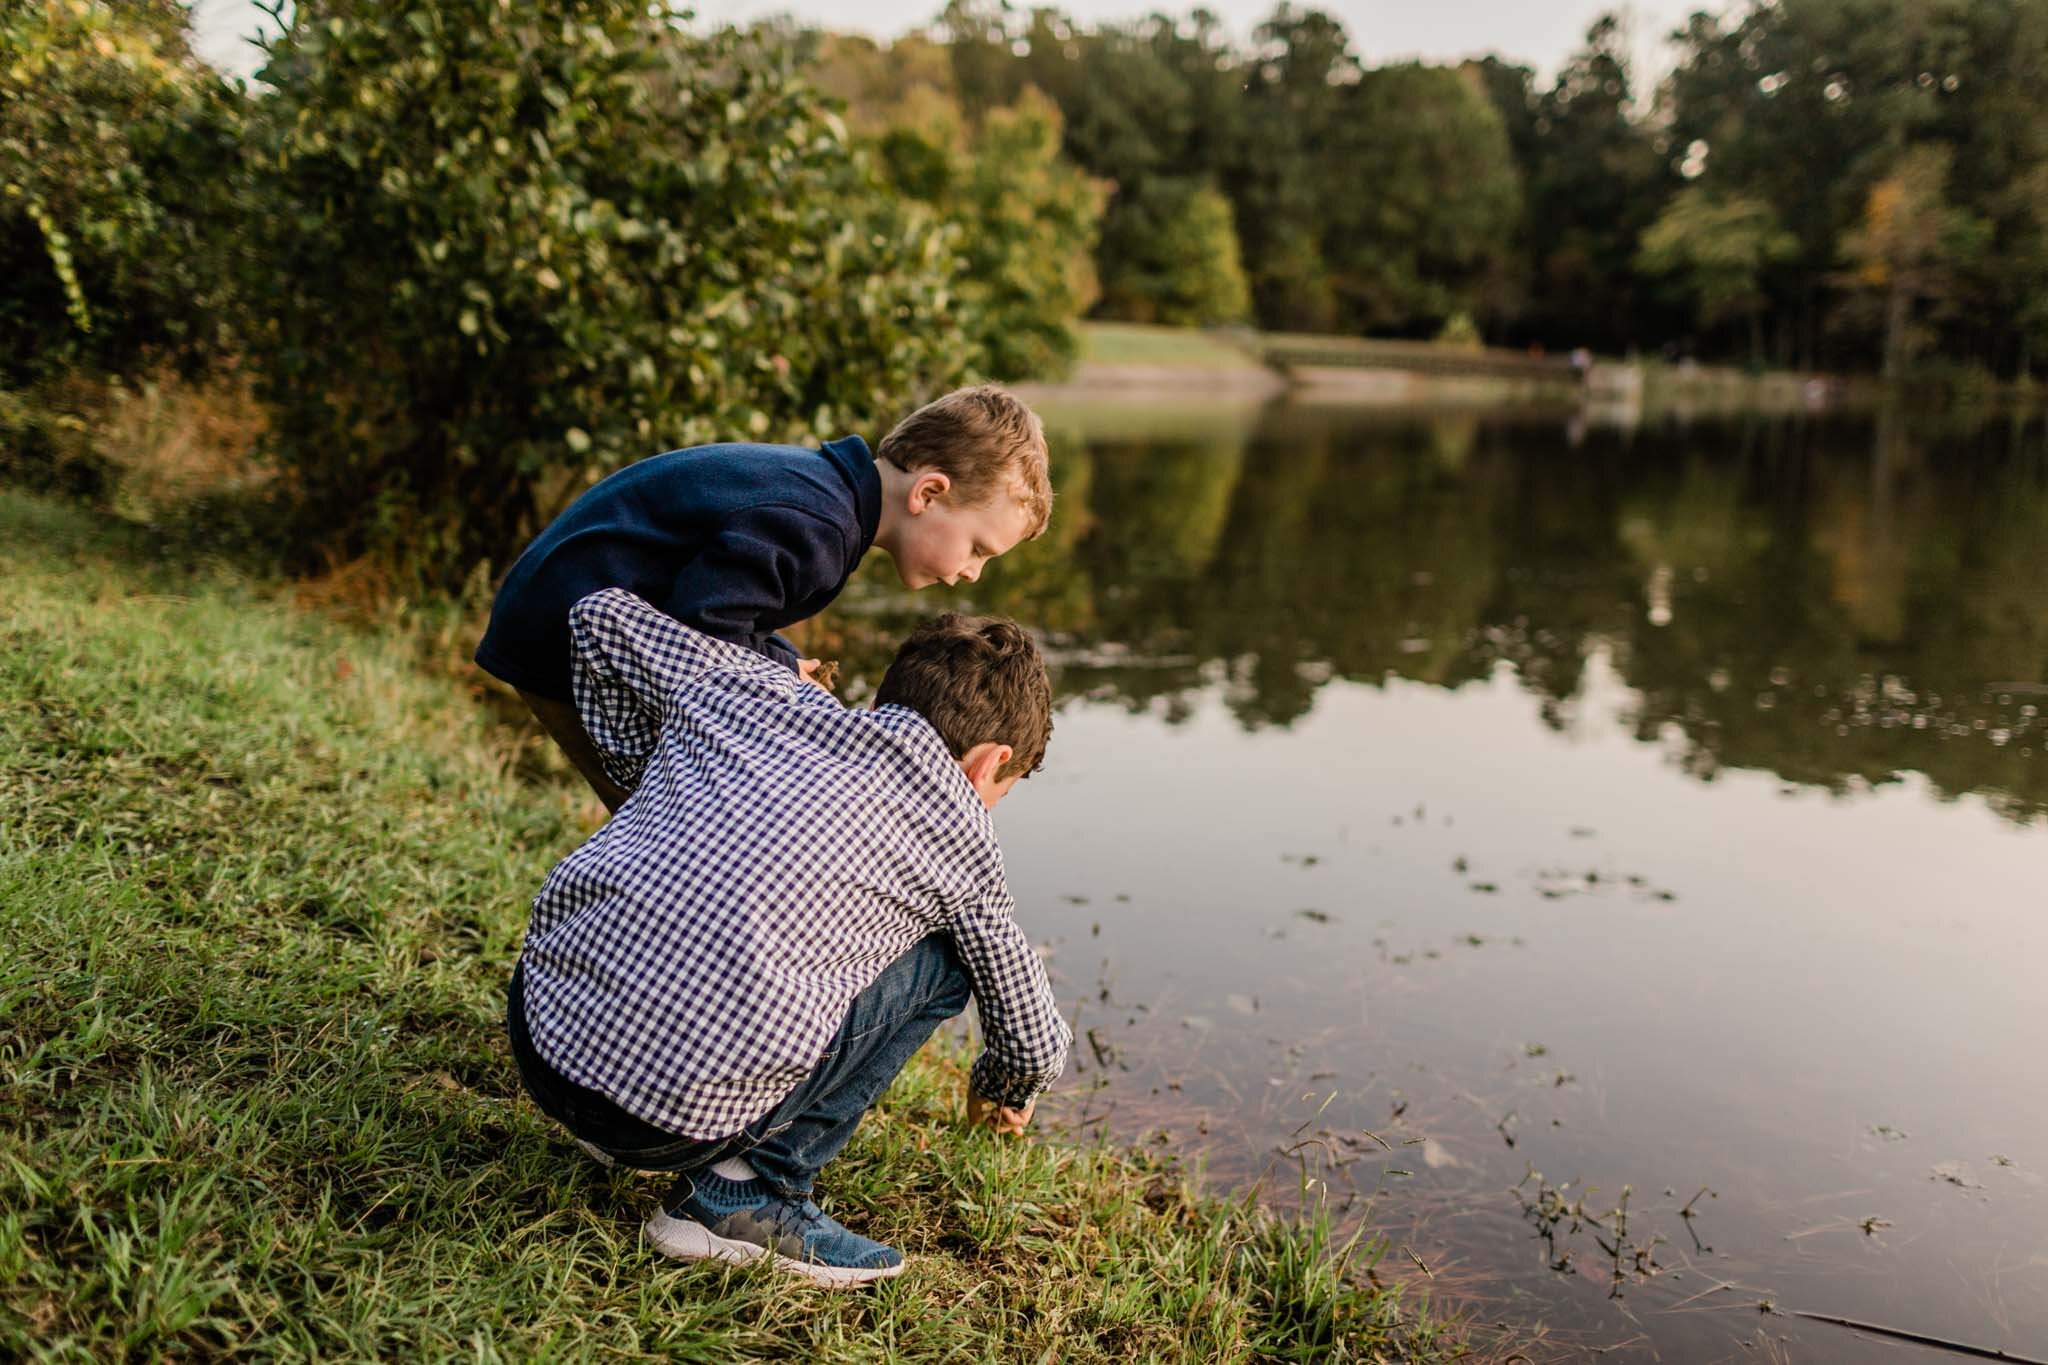 Raleigh Family Photographer | By G. Lin Photography | Umstead Park | Two young boys standing by lake